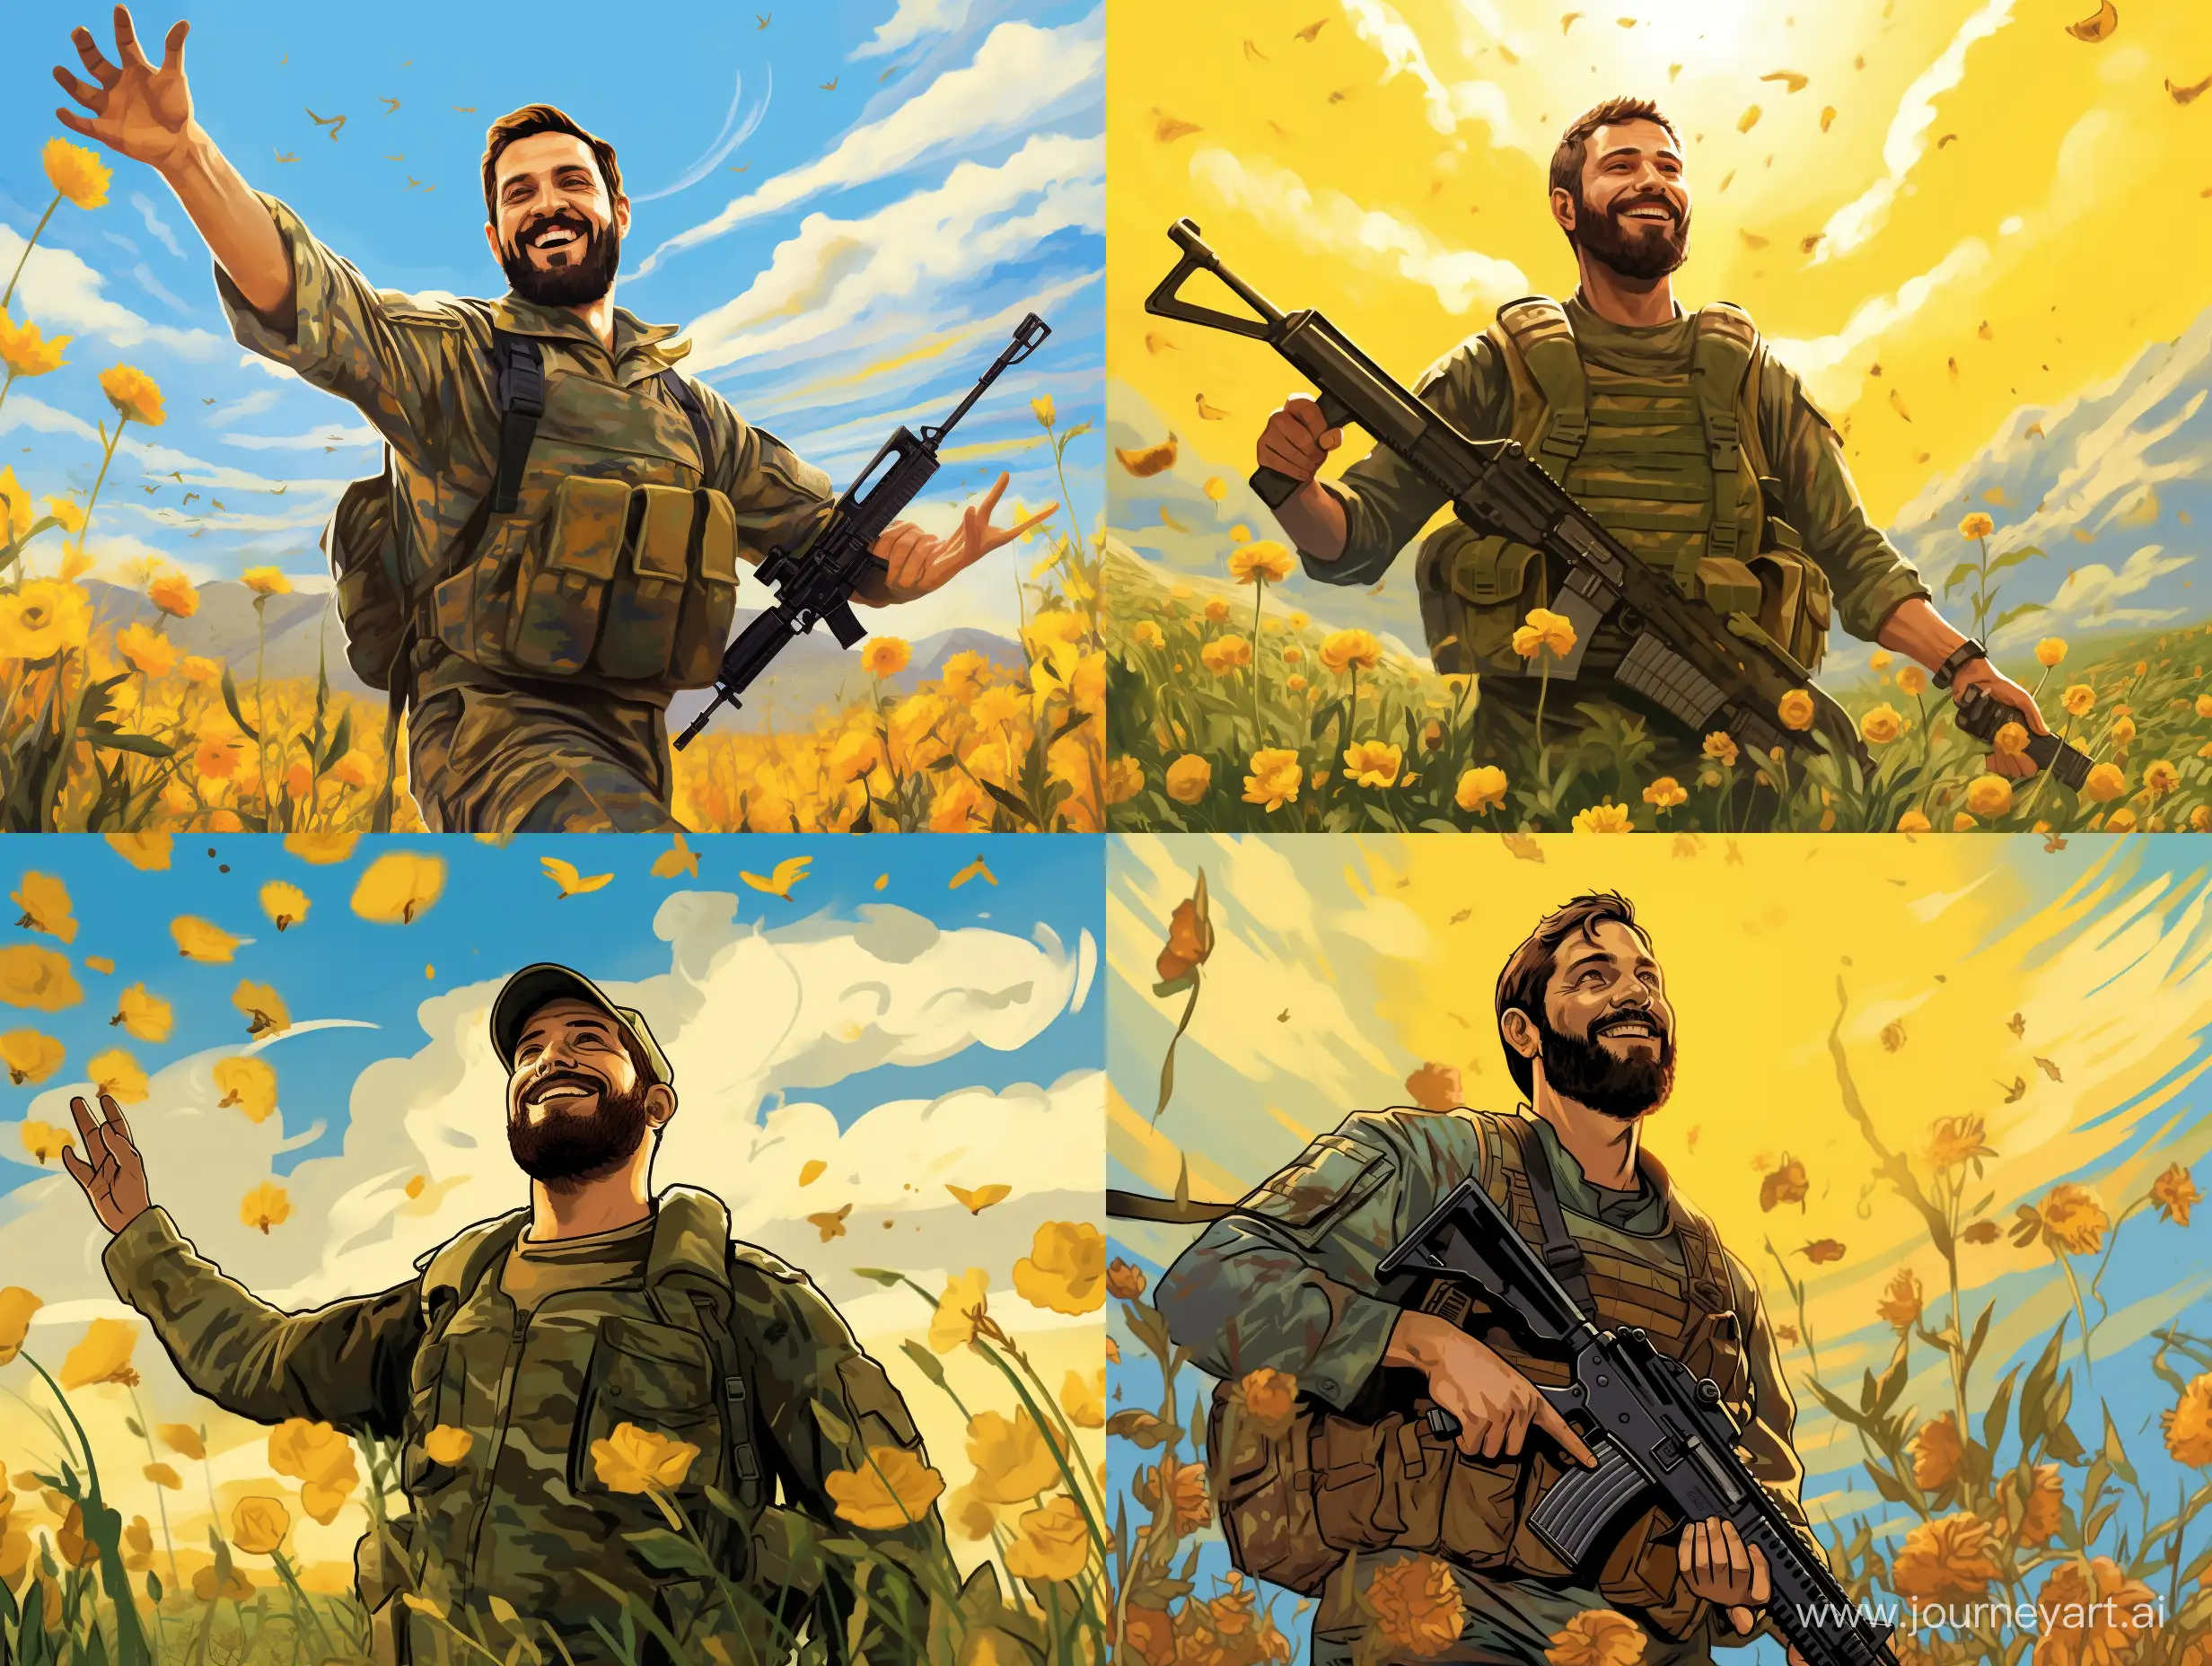 Hezbollah-Soldier-Smiling-in-Yellow-Rose-Field-Under-Blue-Sky